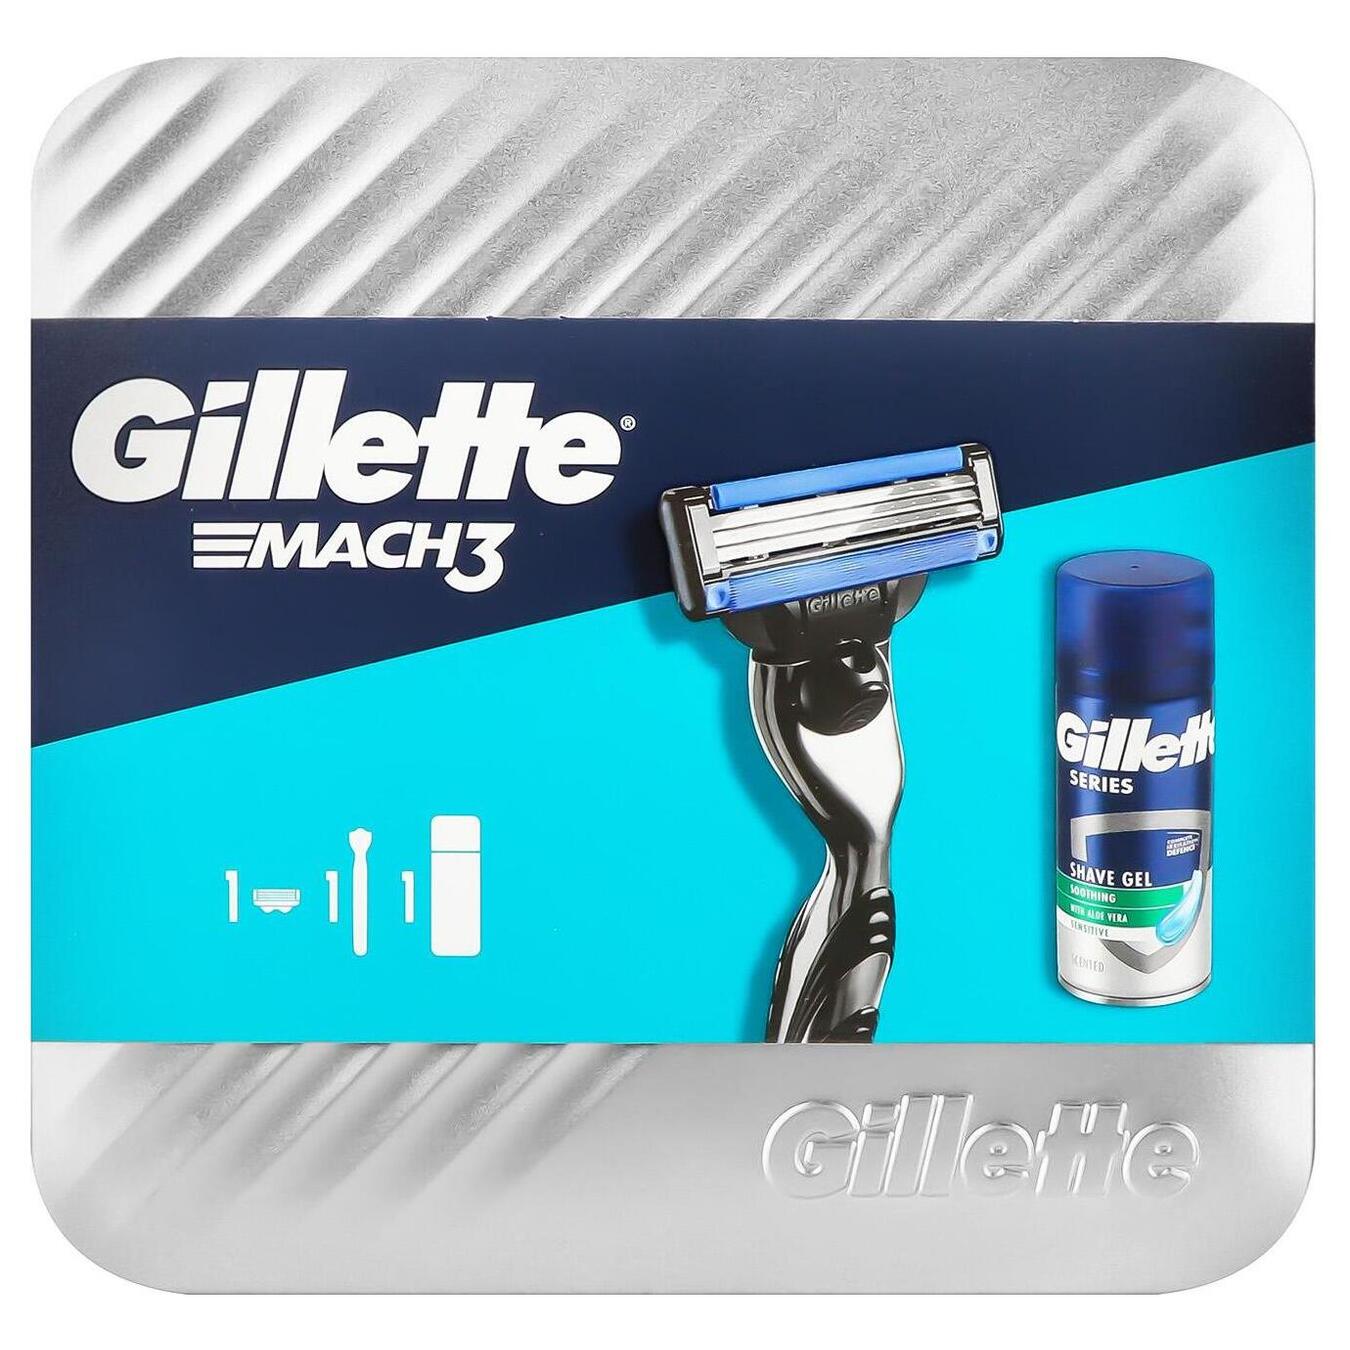 Razor set with 1 replaceable cartridge + shaving gel Series soothing Gillette Mach 375ml